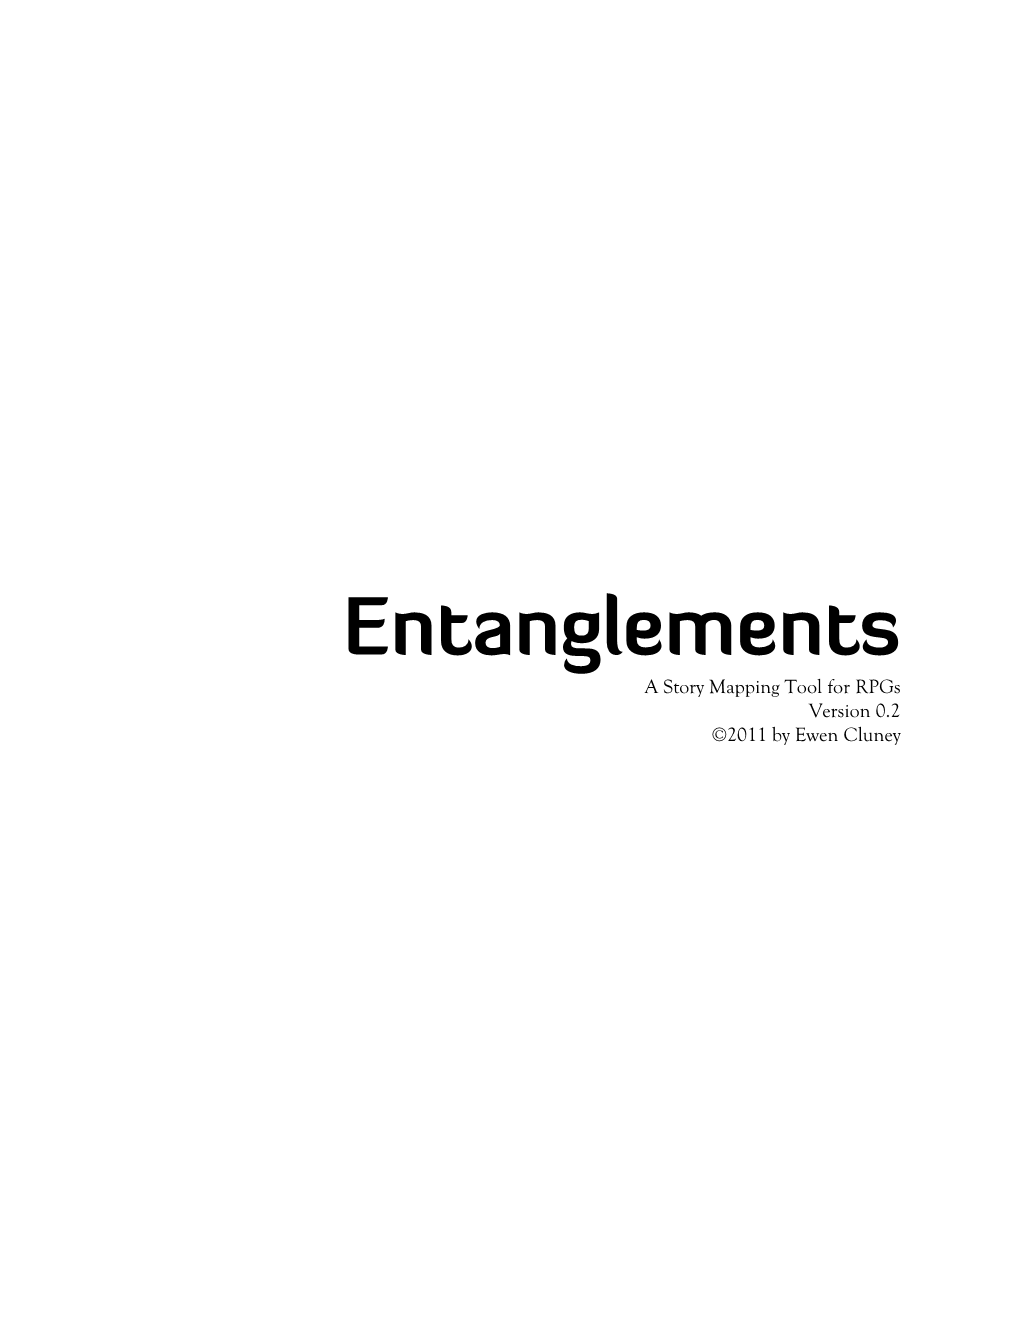 Entanglements a Story Mapping Tool for Rpgs Version 0.2 ©2011 by Ewen Cluney